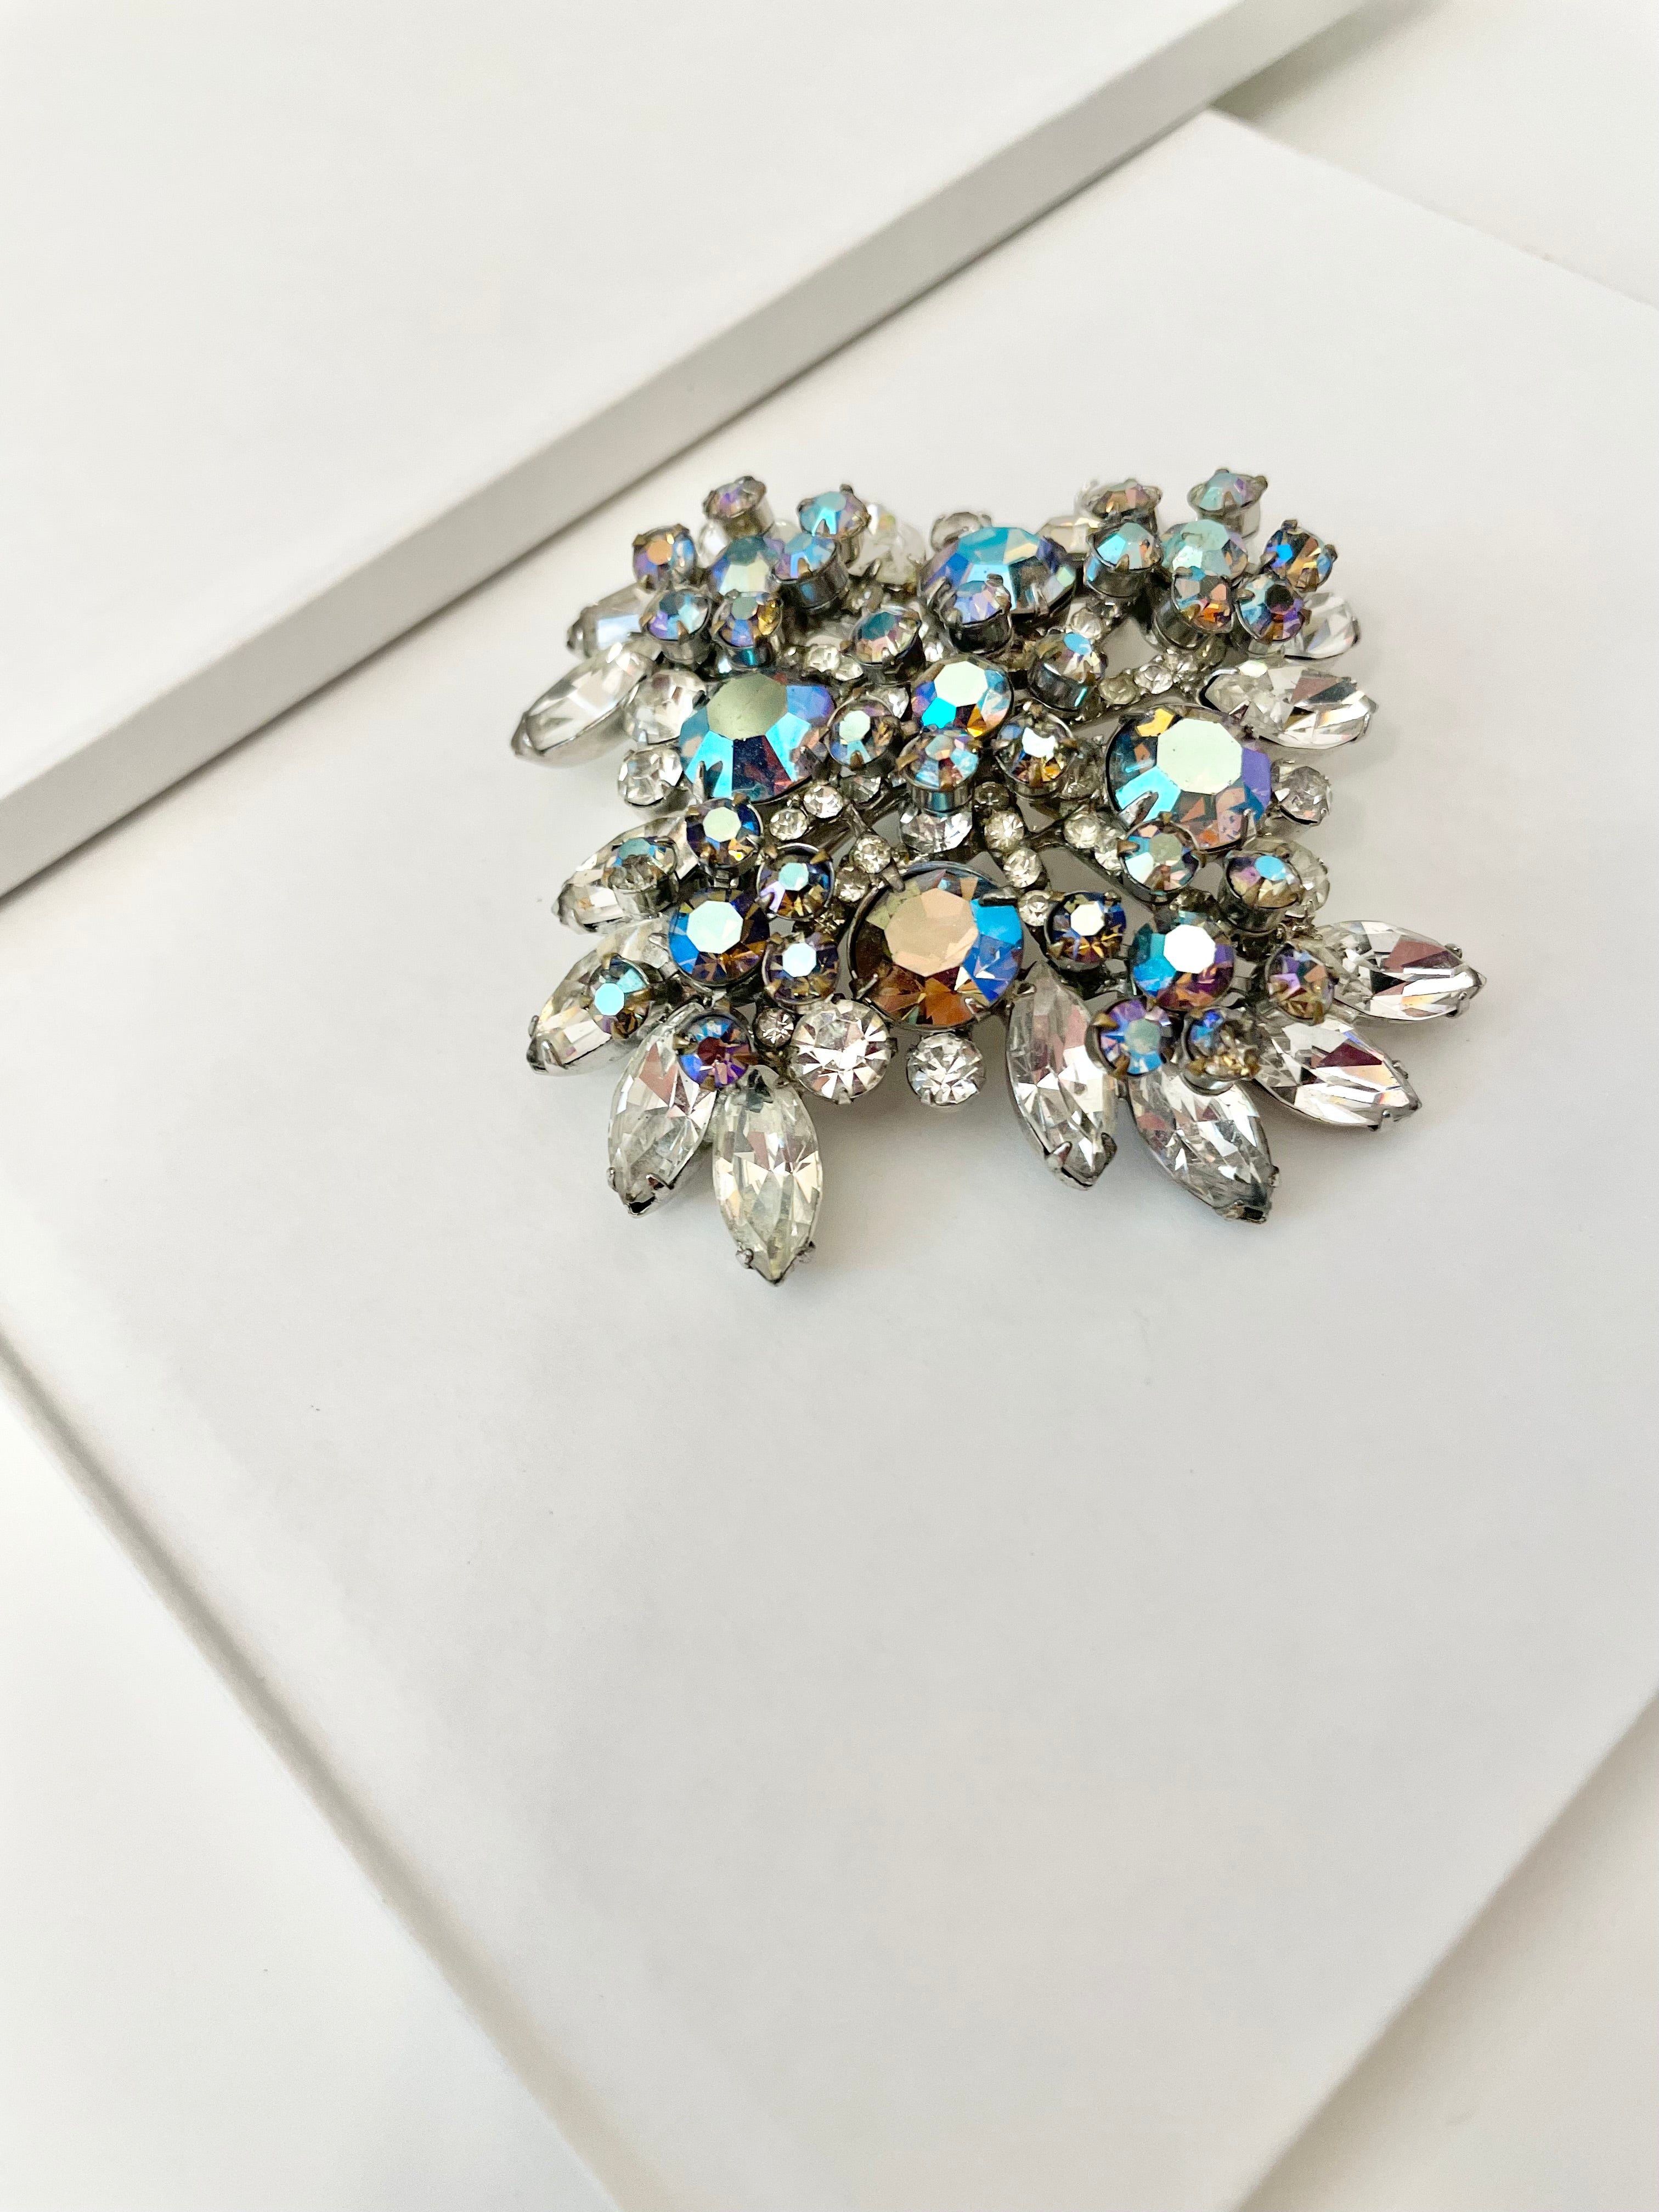 1960's shimmer delightful, large and show stopping brooch! So extraordinary